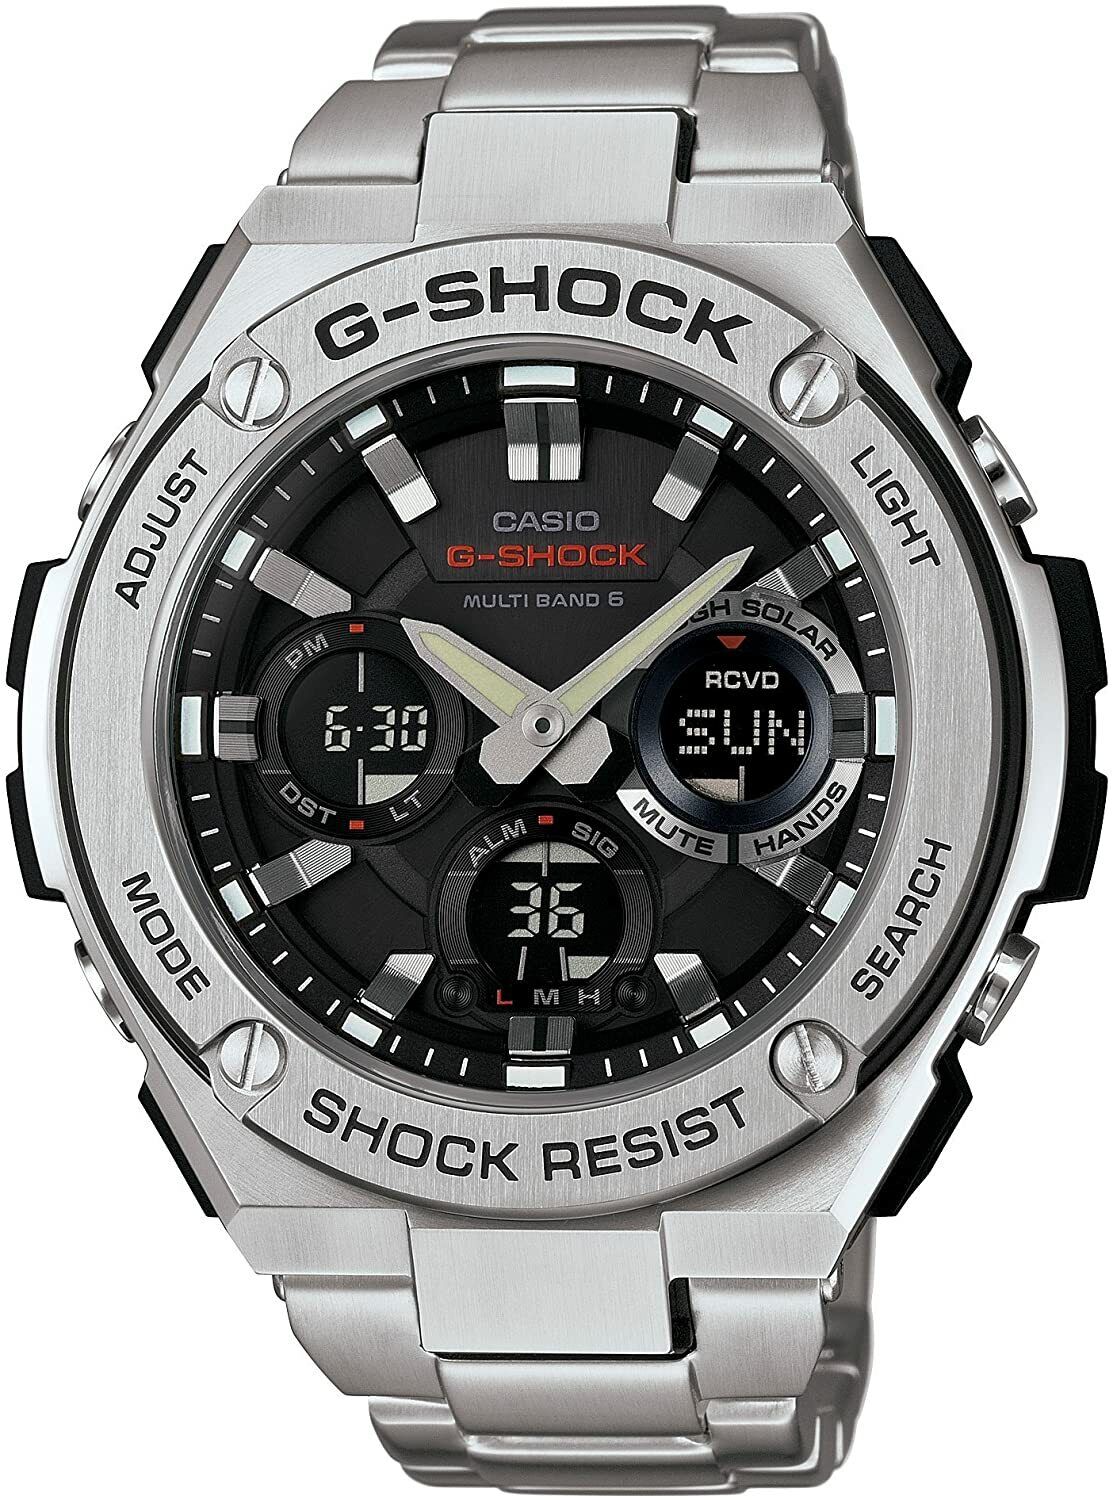 Casio G-Shock GST-W110D-1AJF Stainless Steel Multi-Band Solar 